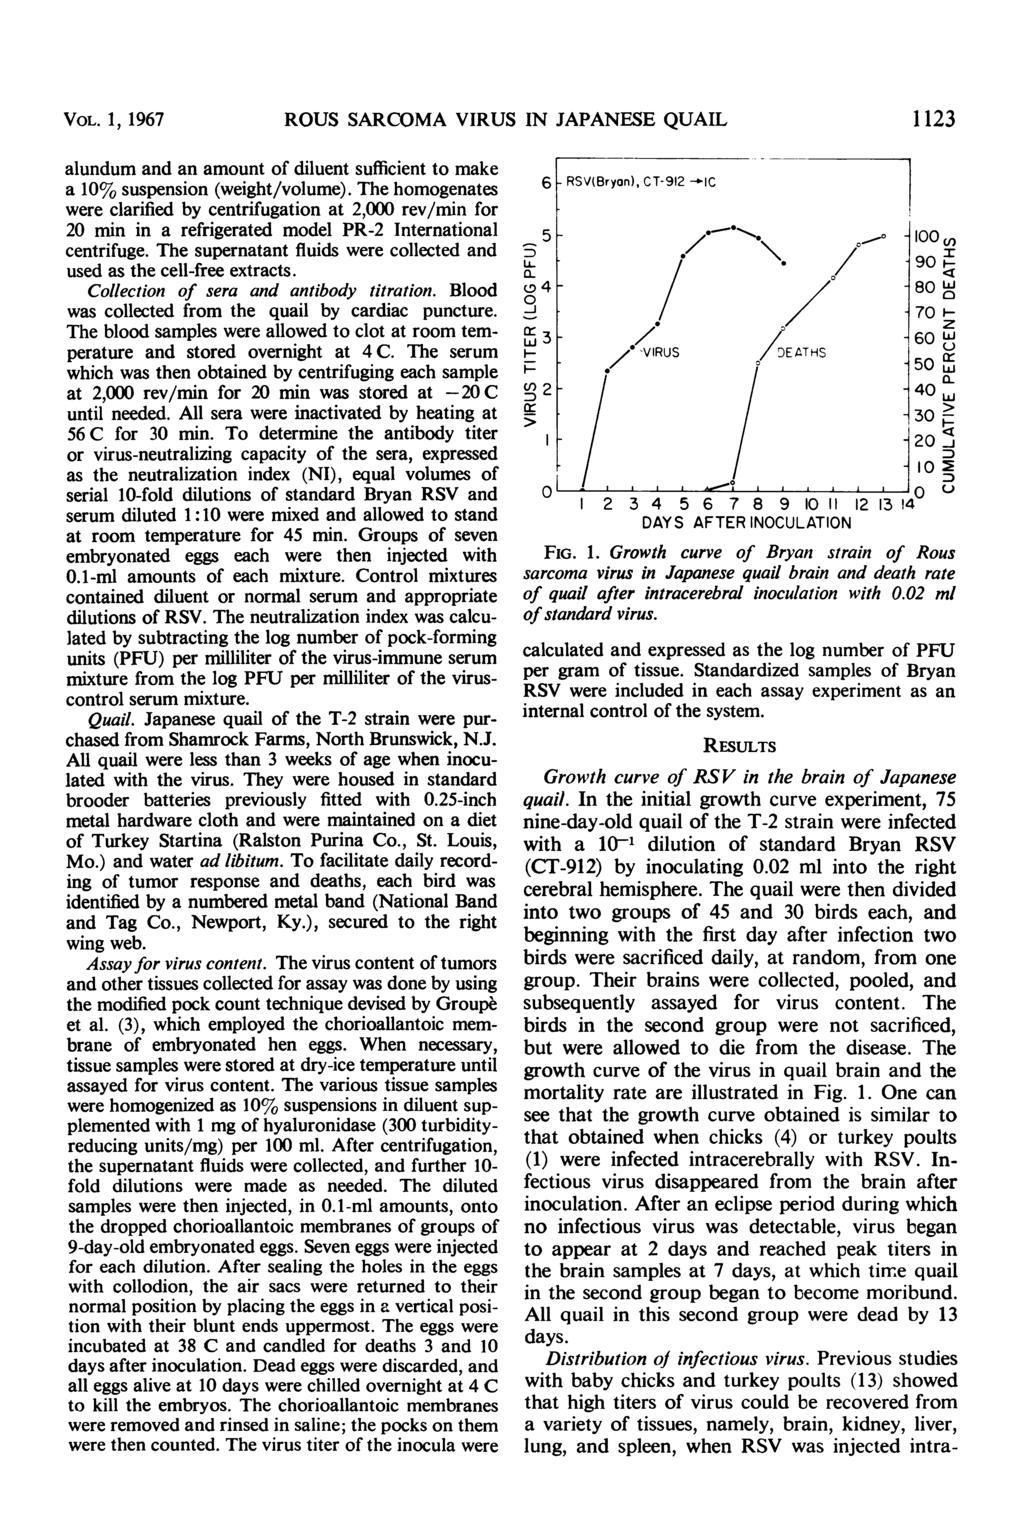 VOL. I, 1967 ROUS SARCOMA VIRUS IN JAPANESE QUAIL 1 123 alundum and an amount of diluent sufficient to make a 10% suspension (weight/volume).